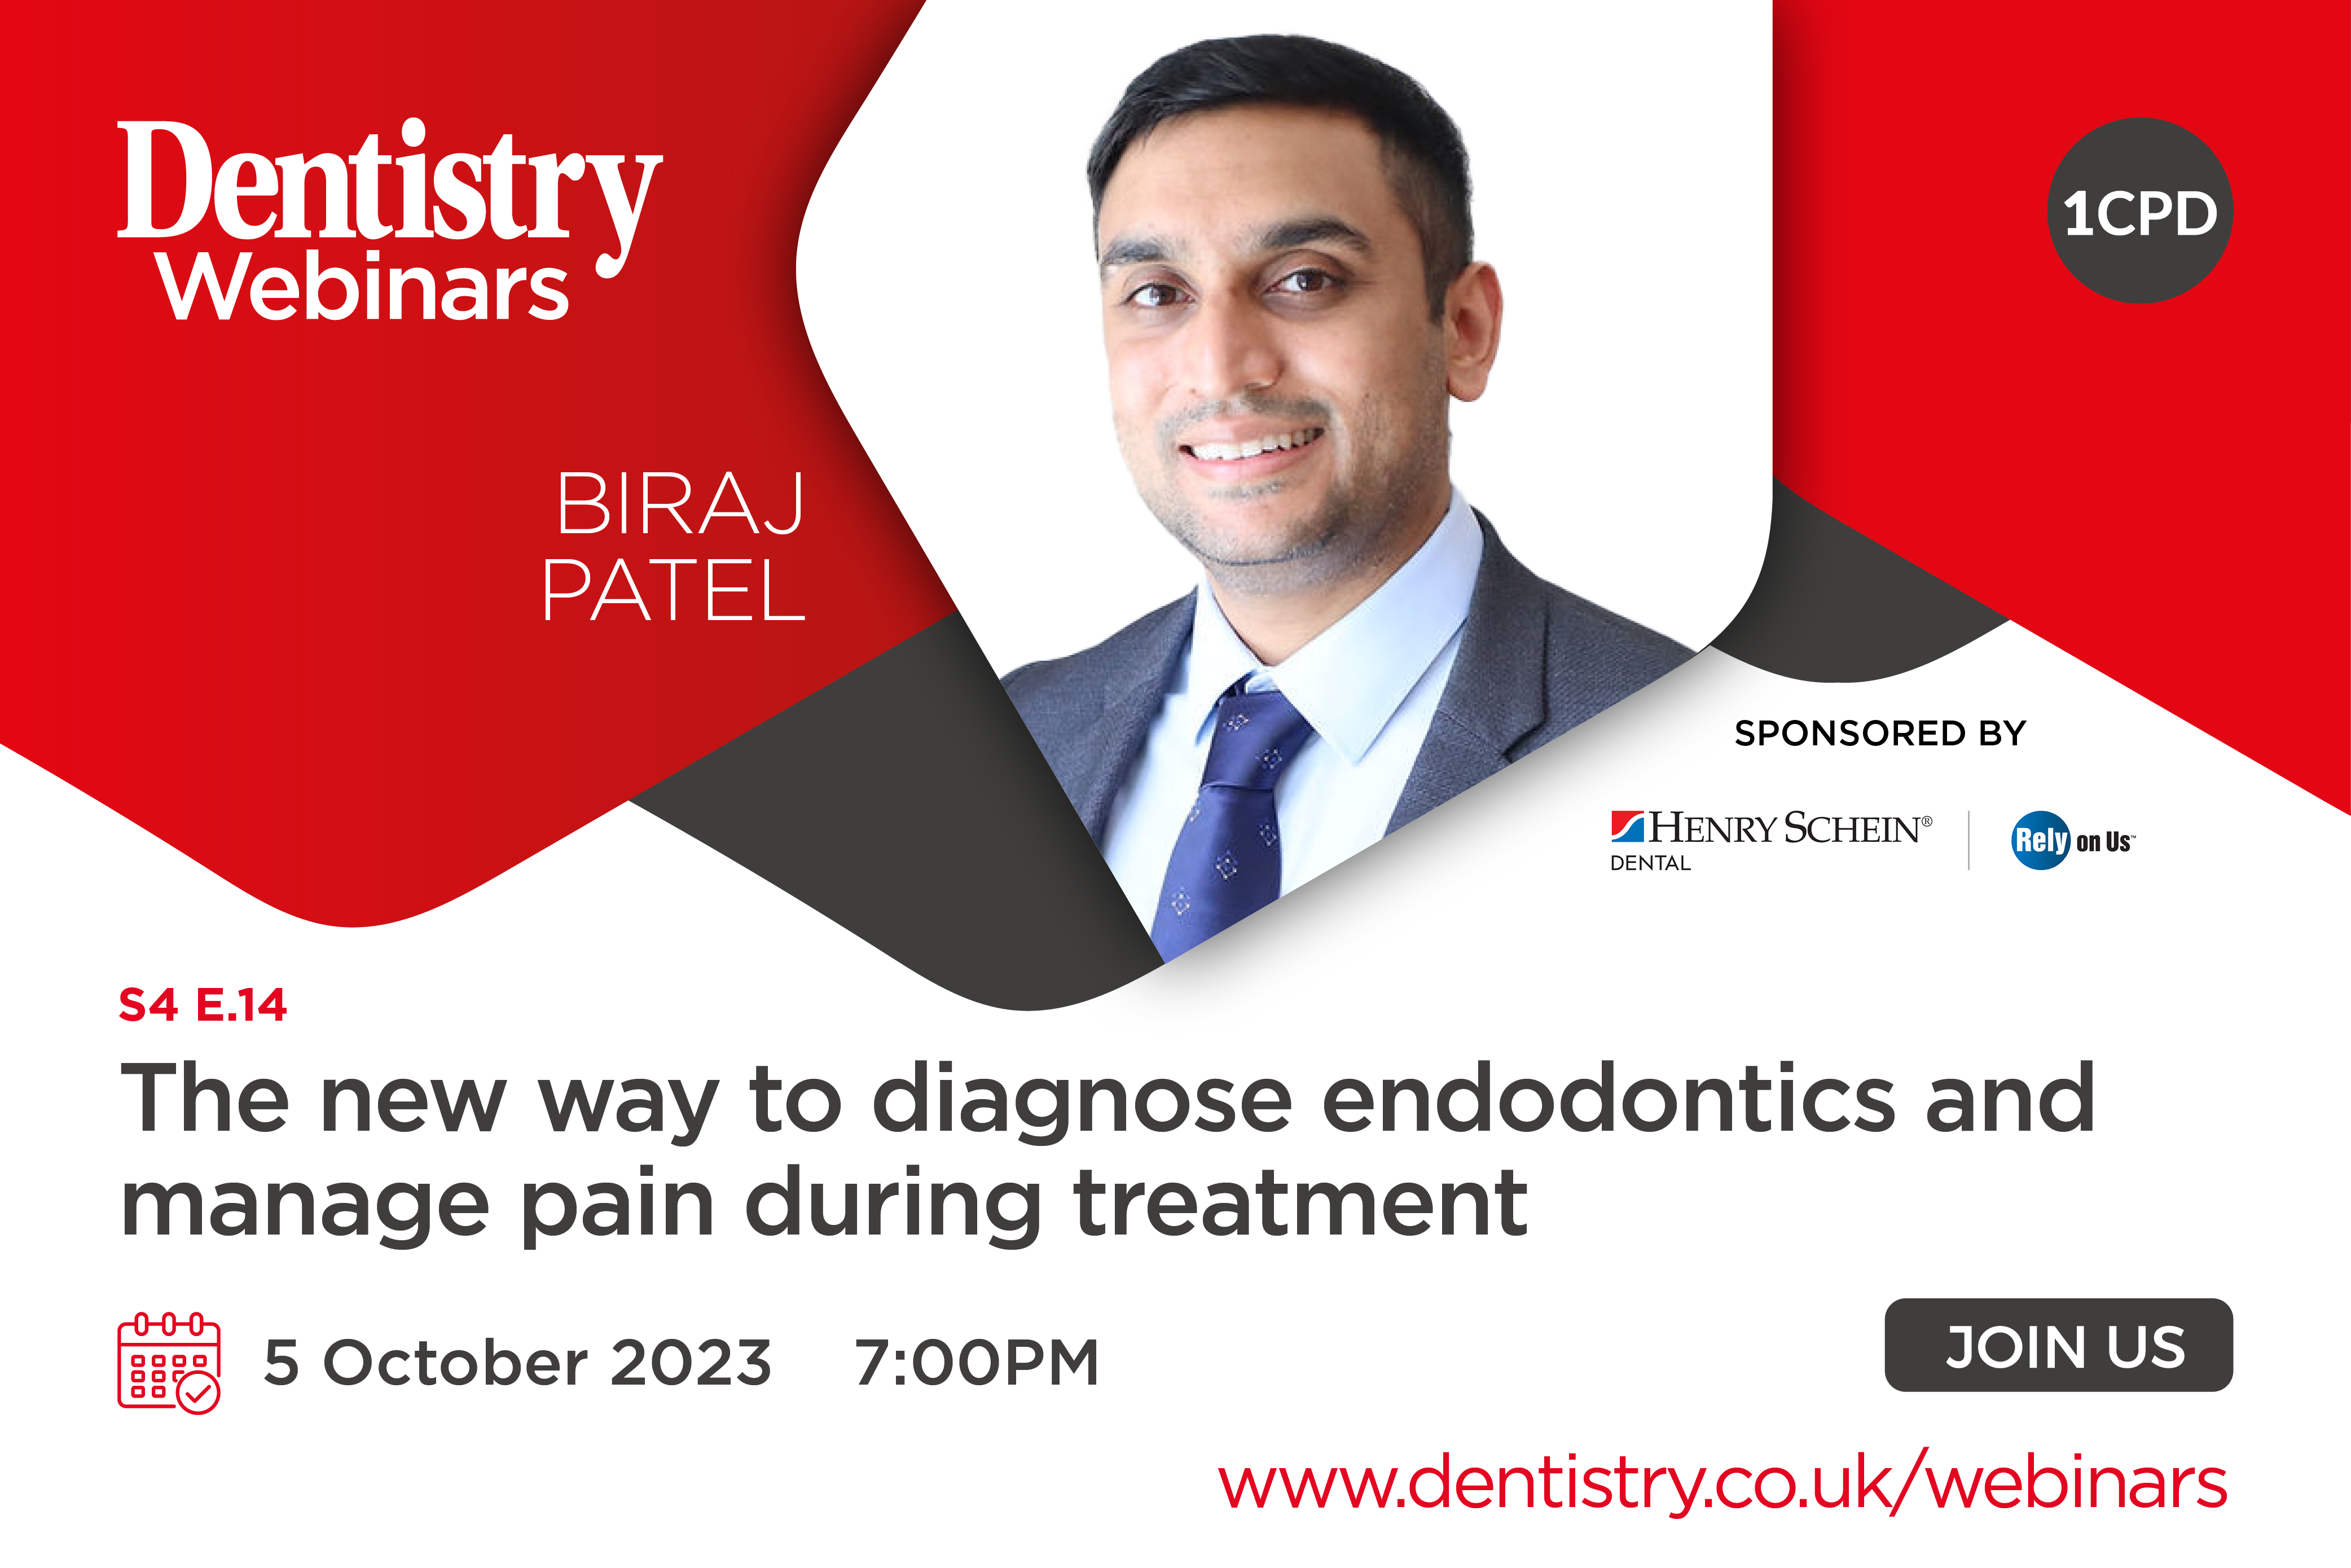 Join Biraj Patel on Thursday 5 October at 7pm as he discusses endodontics – the right diagnosis and treatment without pain.